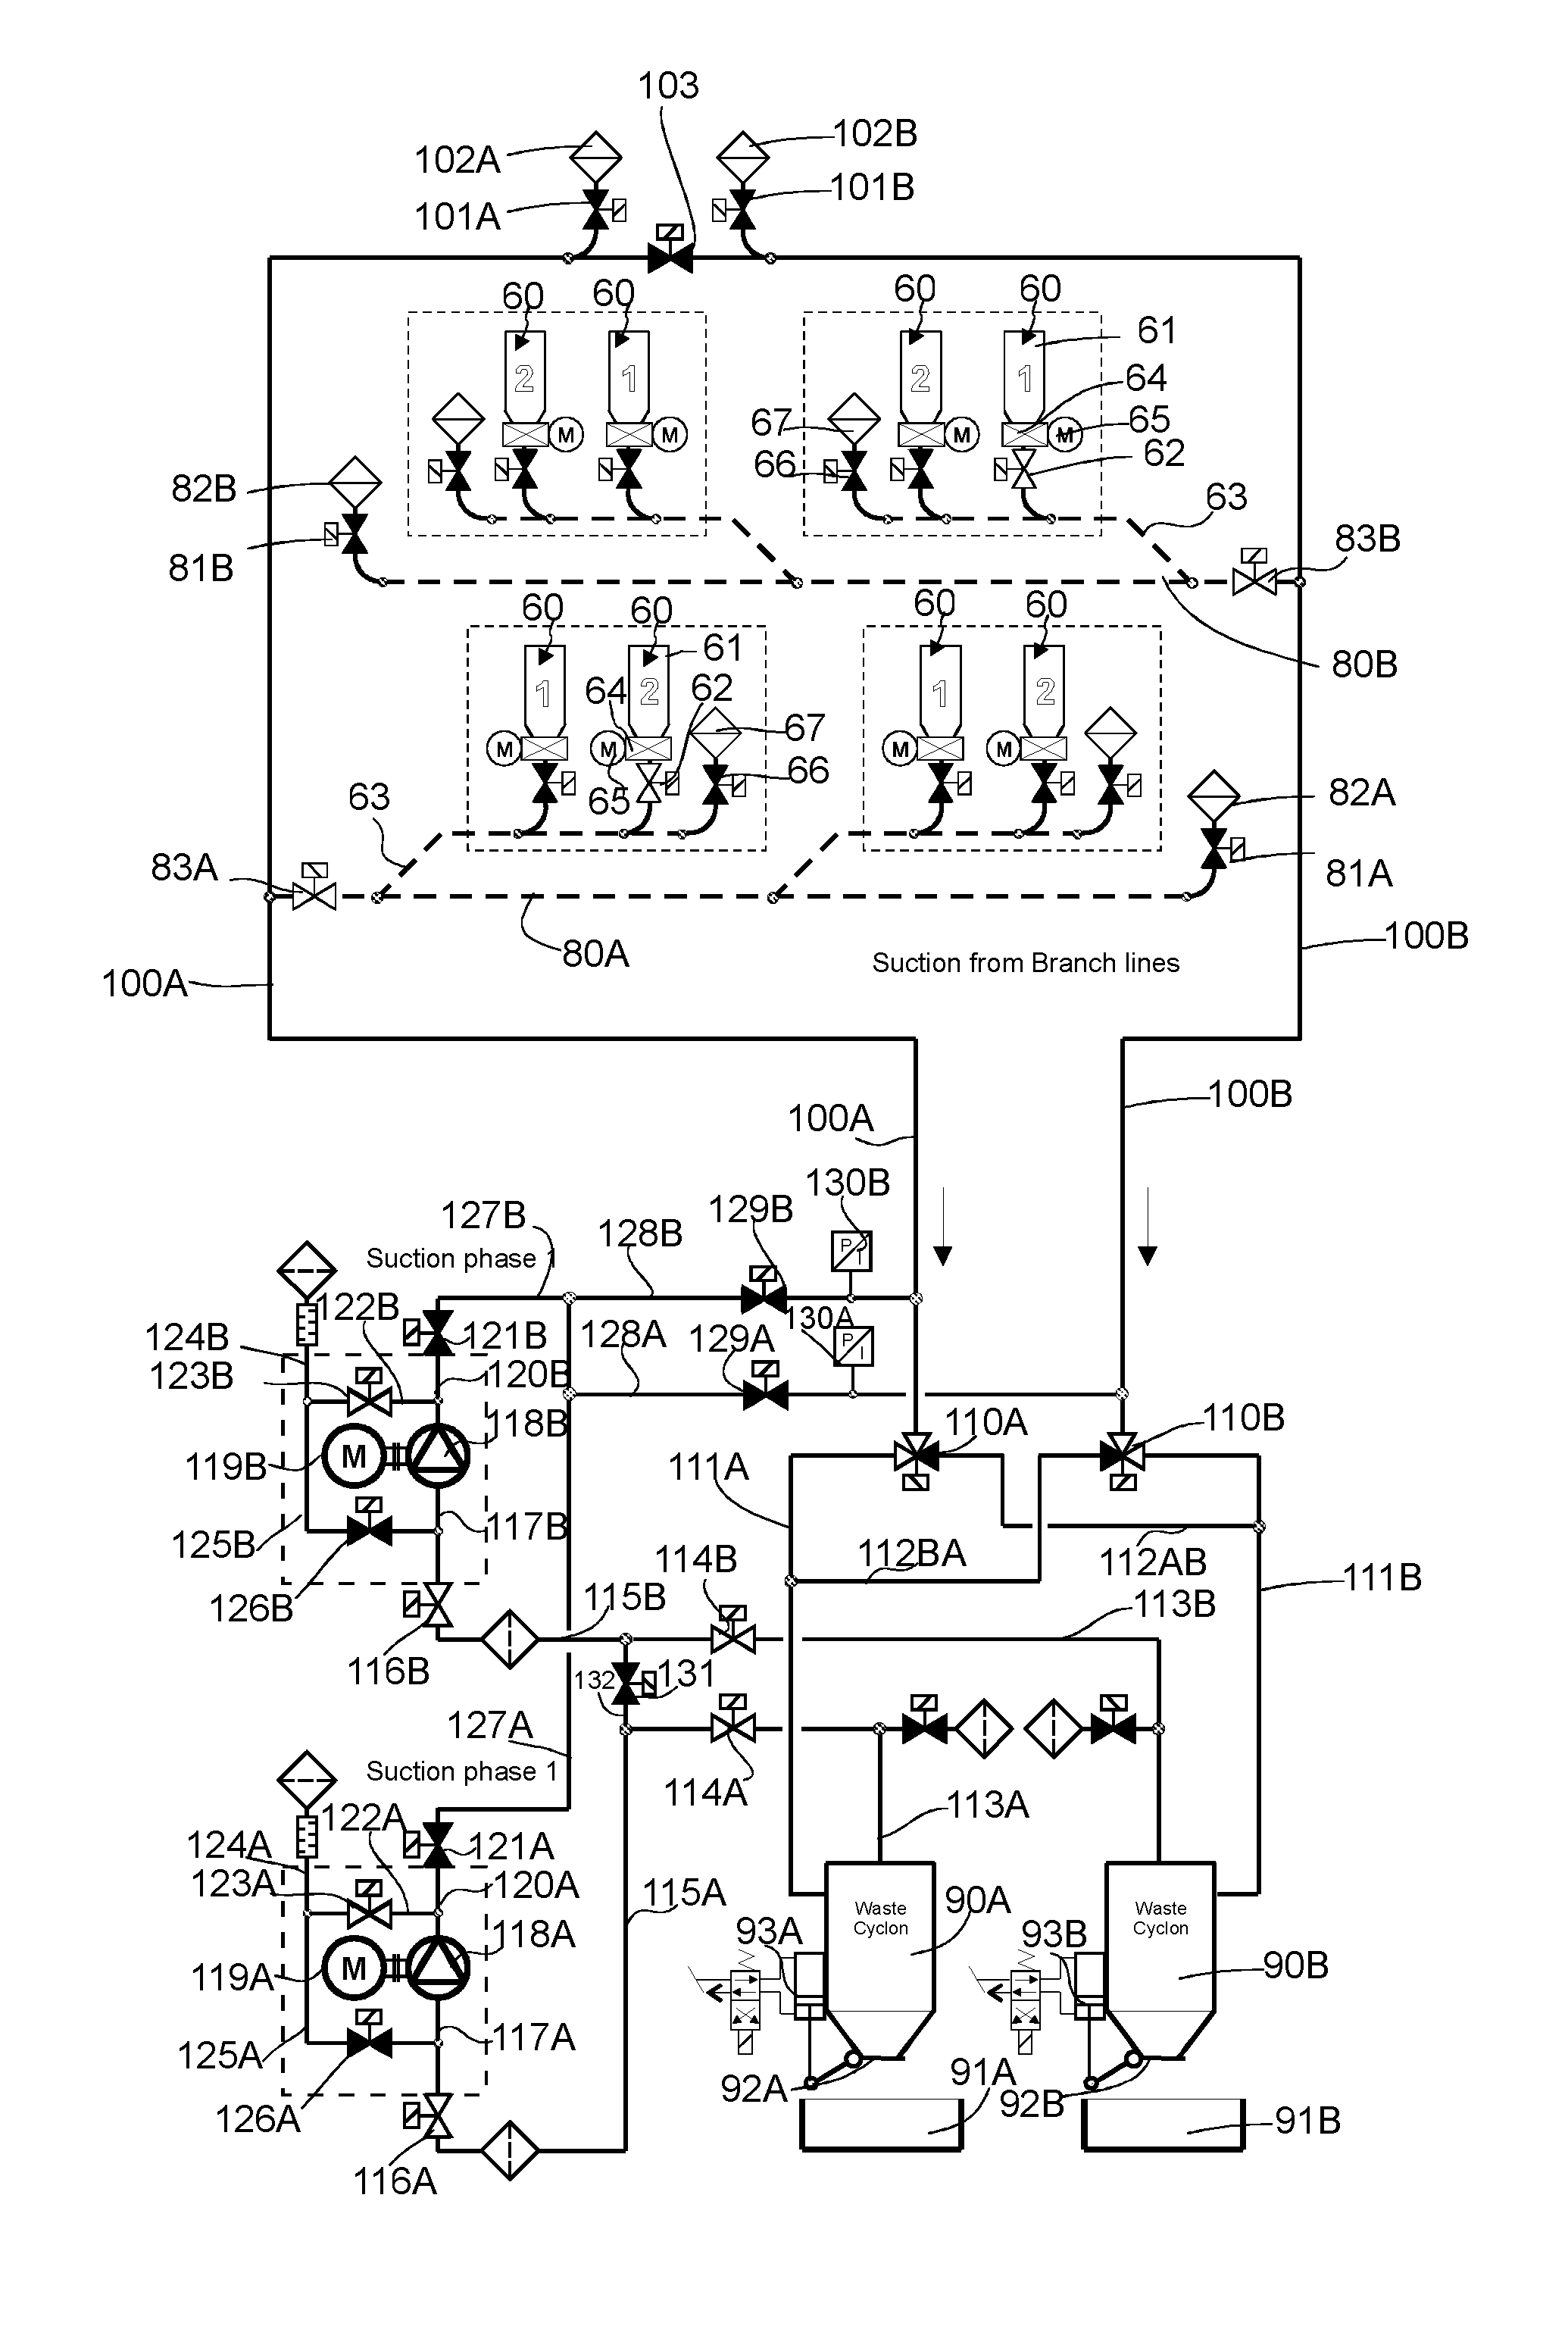 Method and pneumatic material conveying system